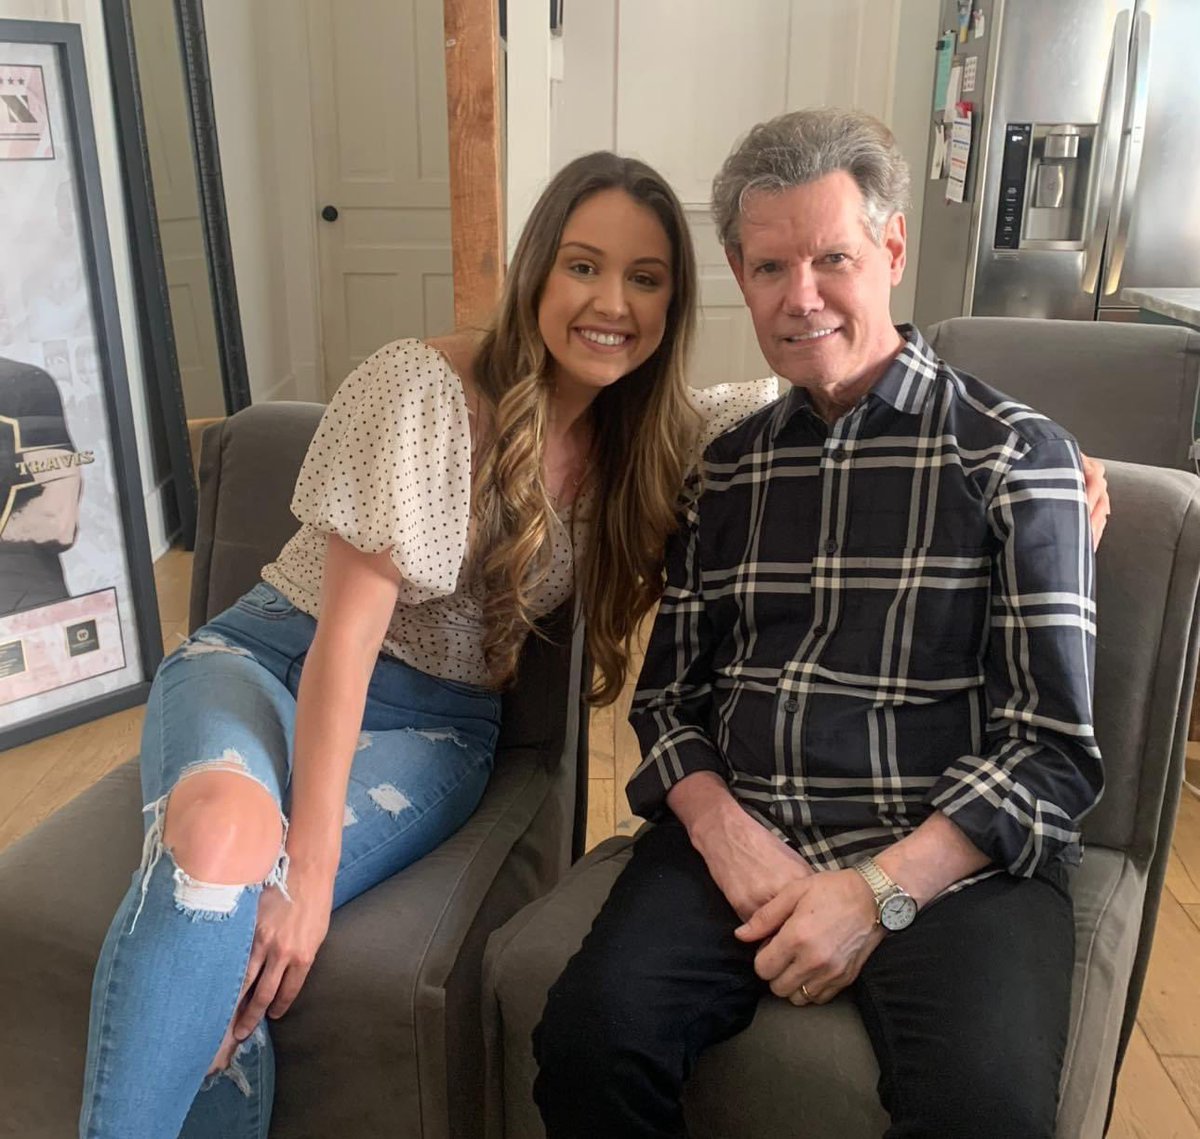 Happy birthday @randytravis! I am so honored to know you and to learn from you! Congratulations on your new song “Where That Came From” it sounds amazing! See you soon friend!